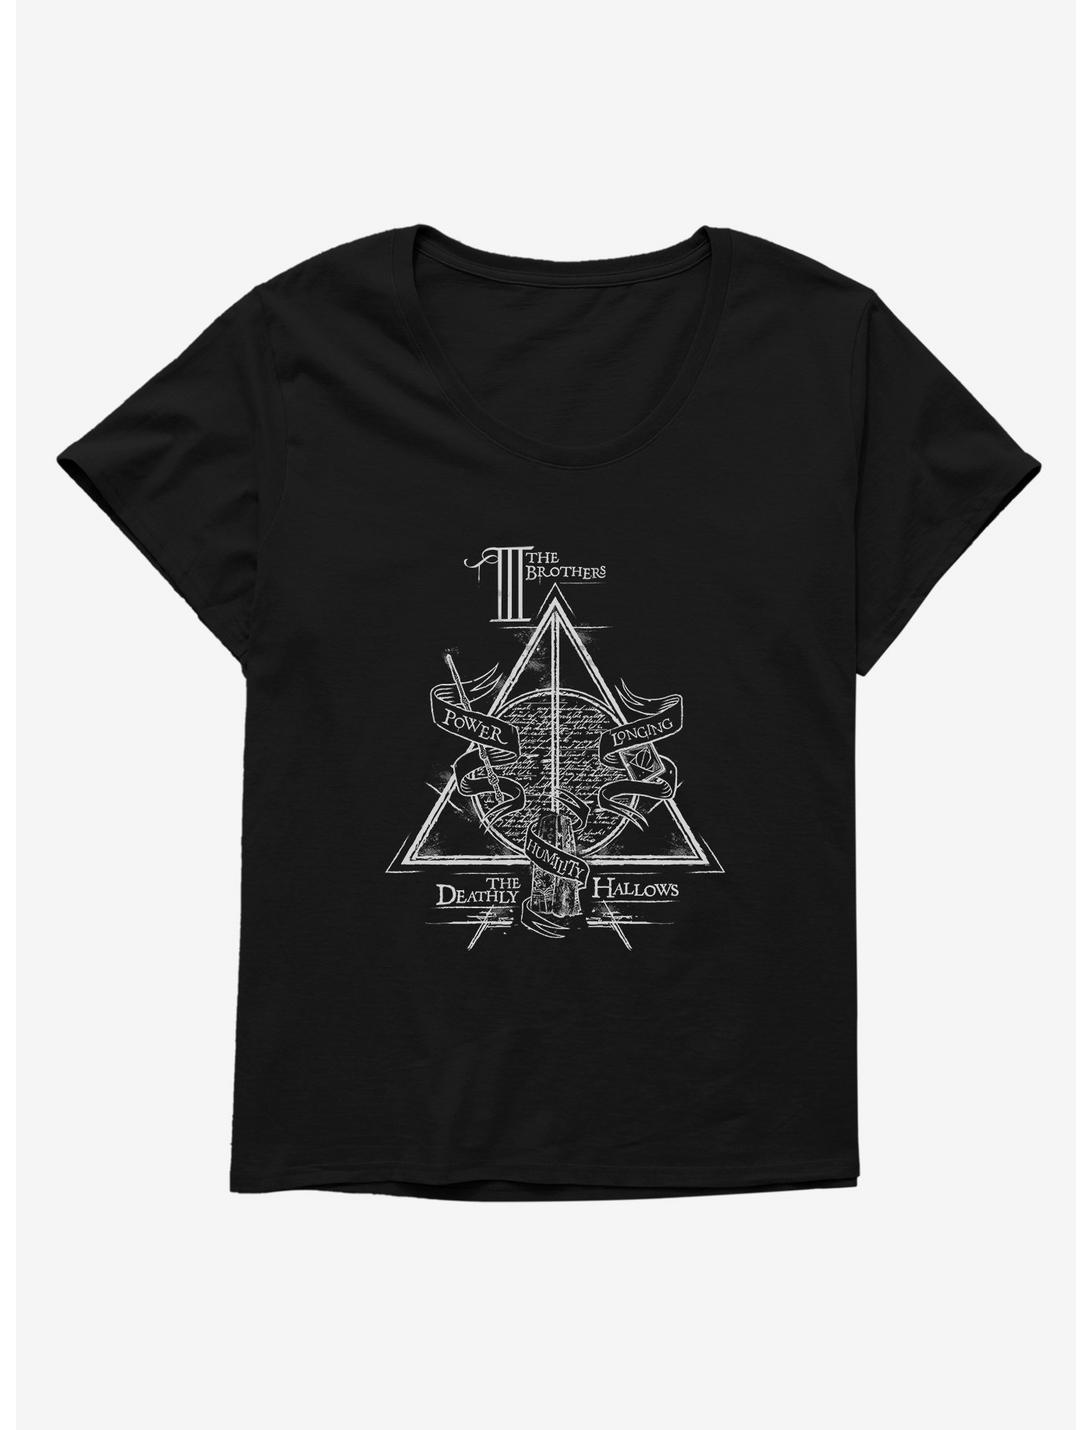 Harry Potter The Three Brothers Deathly Hallows Womens T-Shirt Plus Size, , hi-res